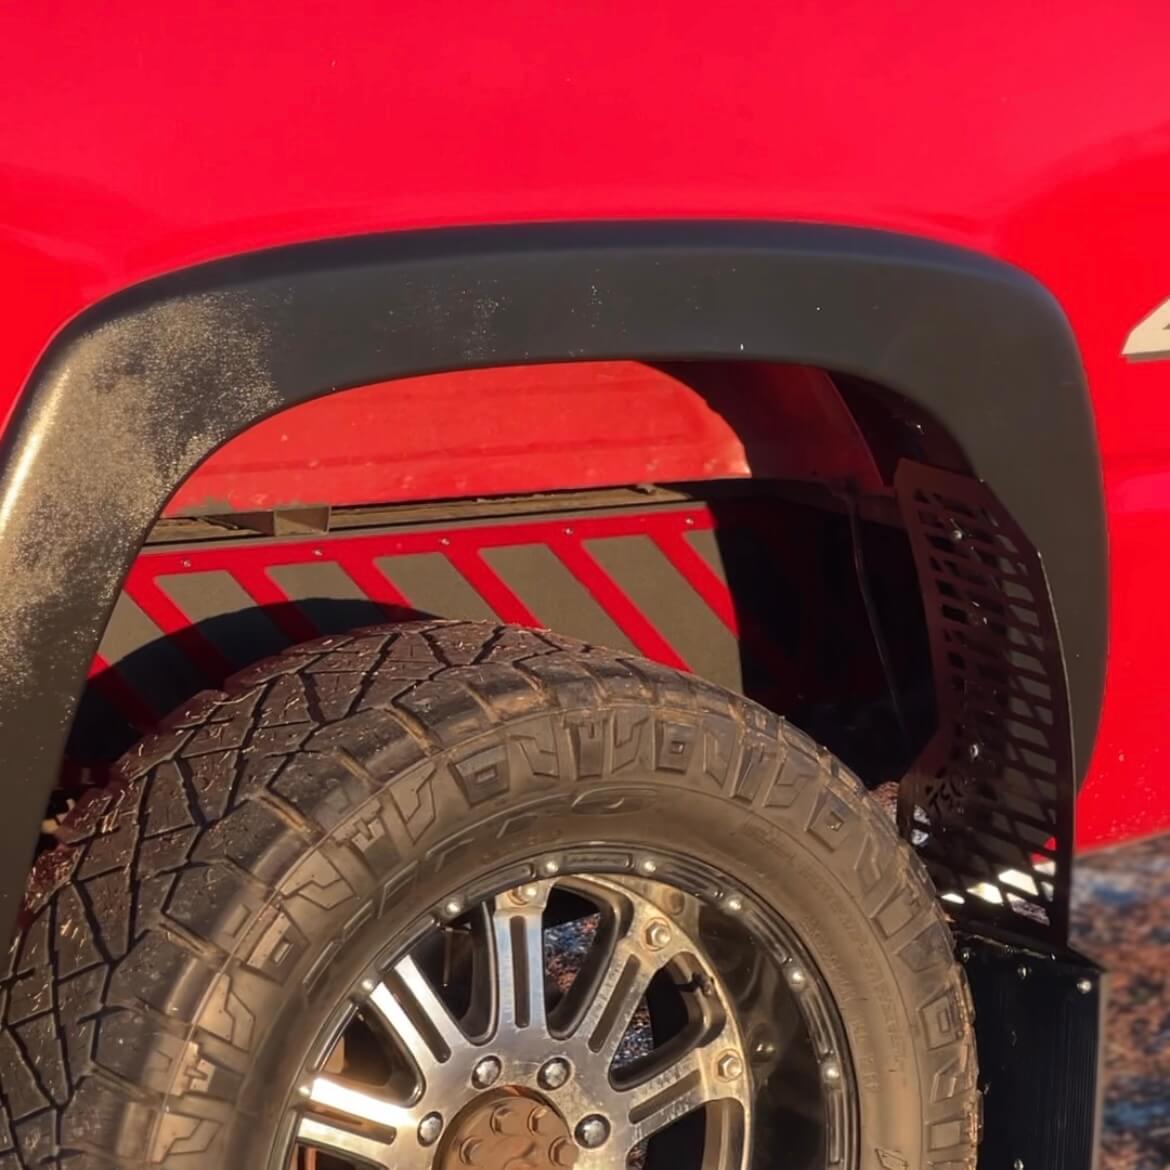 2005 Chevy/GMC 2500 with TSO Frame Overlays and mud flaps